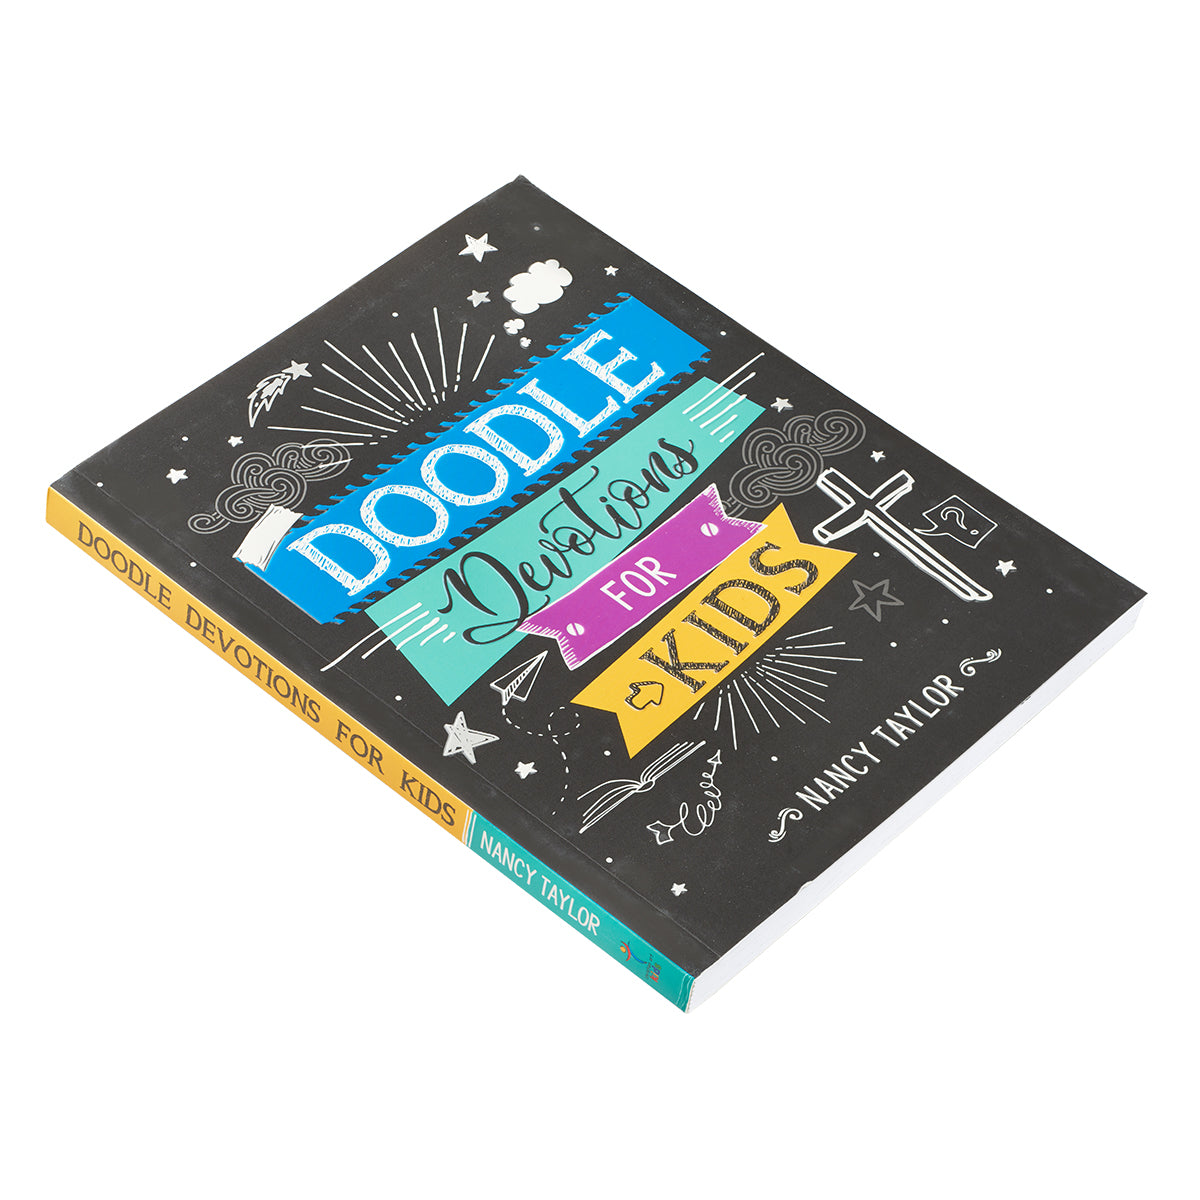 Image of Doodle Devotions for Kids other